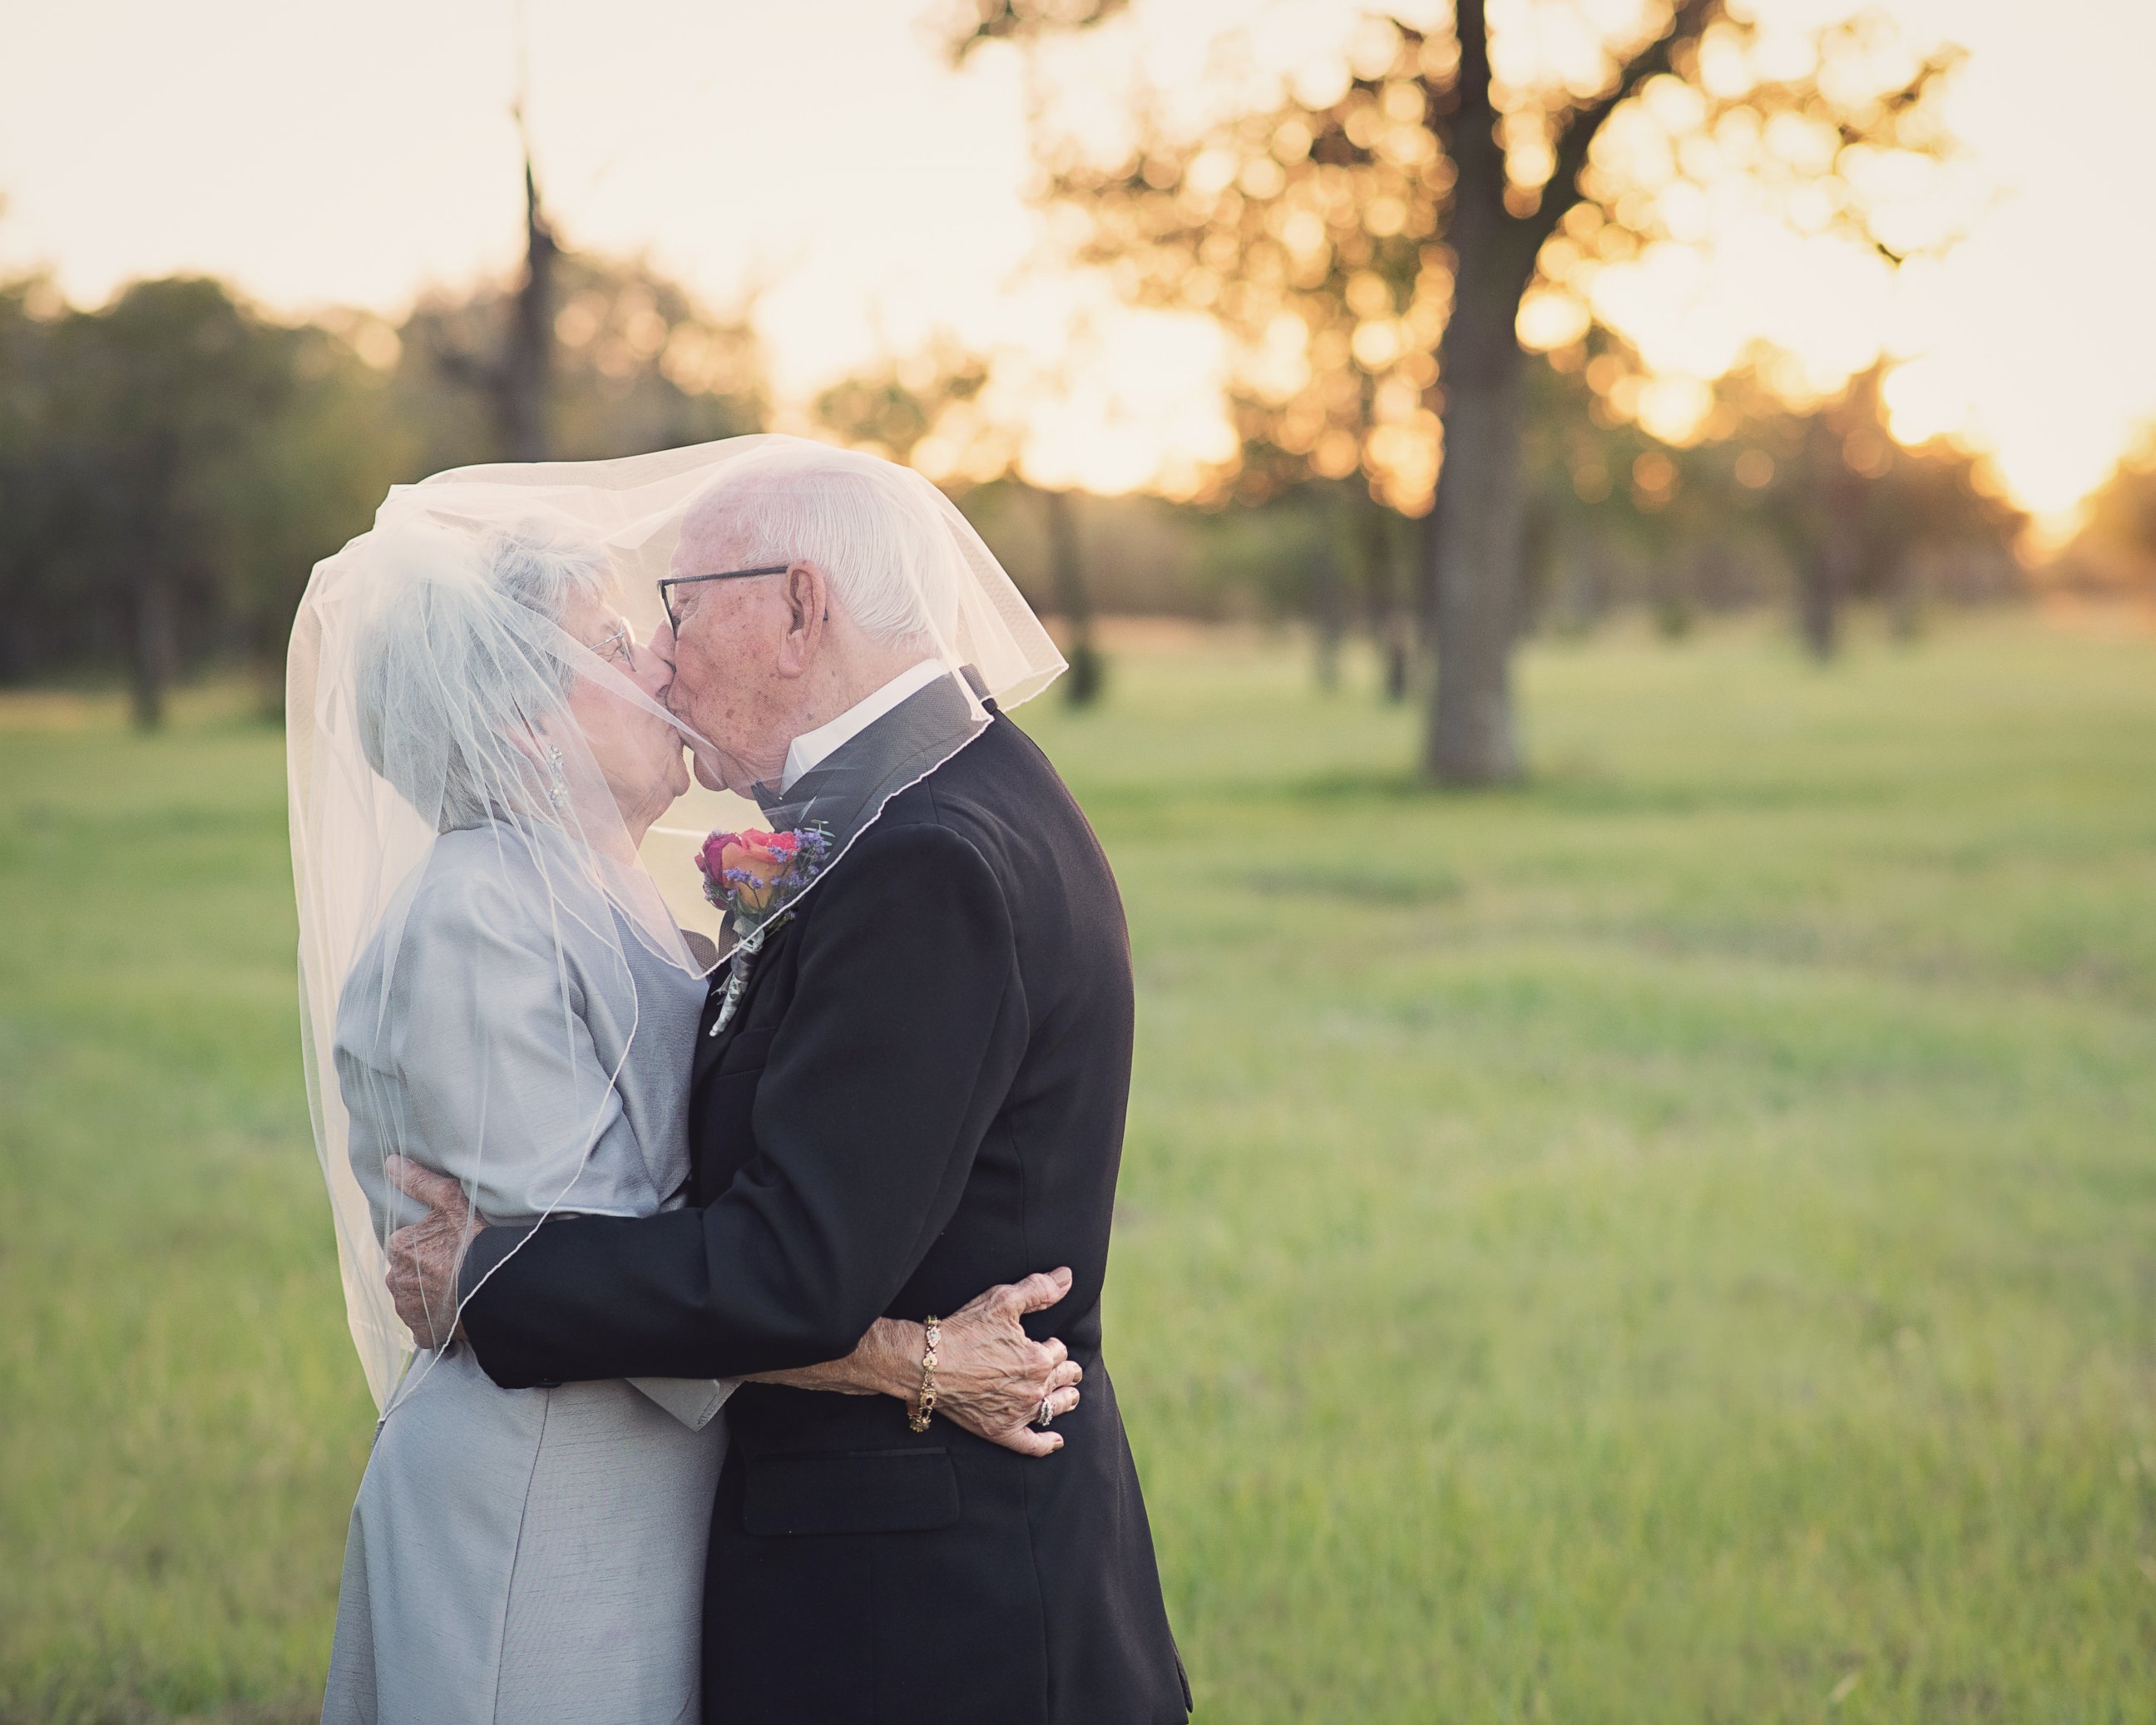 PHOTO: Ferris and Margaret Romaire, of Morgan City, Louisiana, marked their 70th wedding anniversary with a photo shoot.